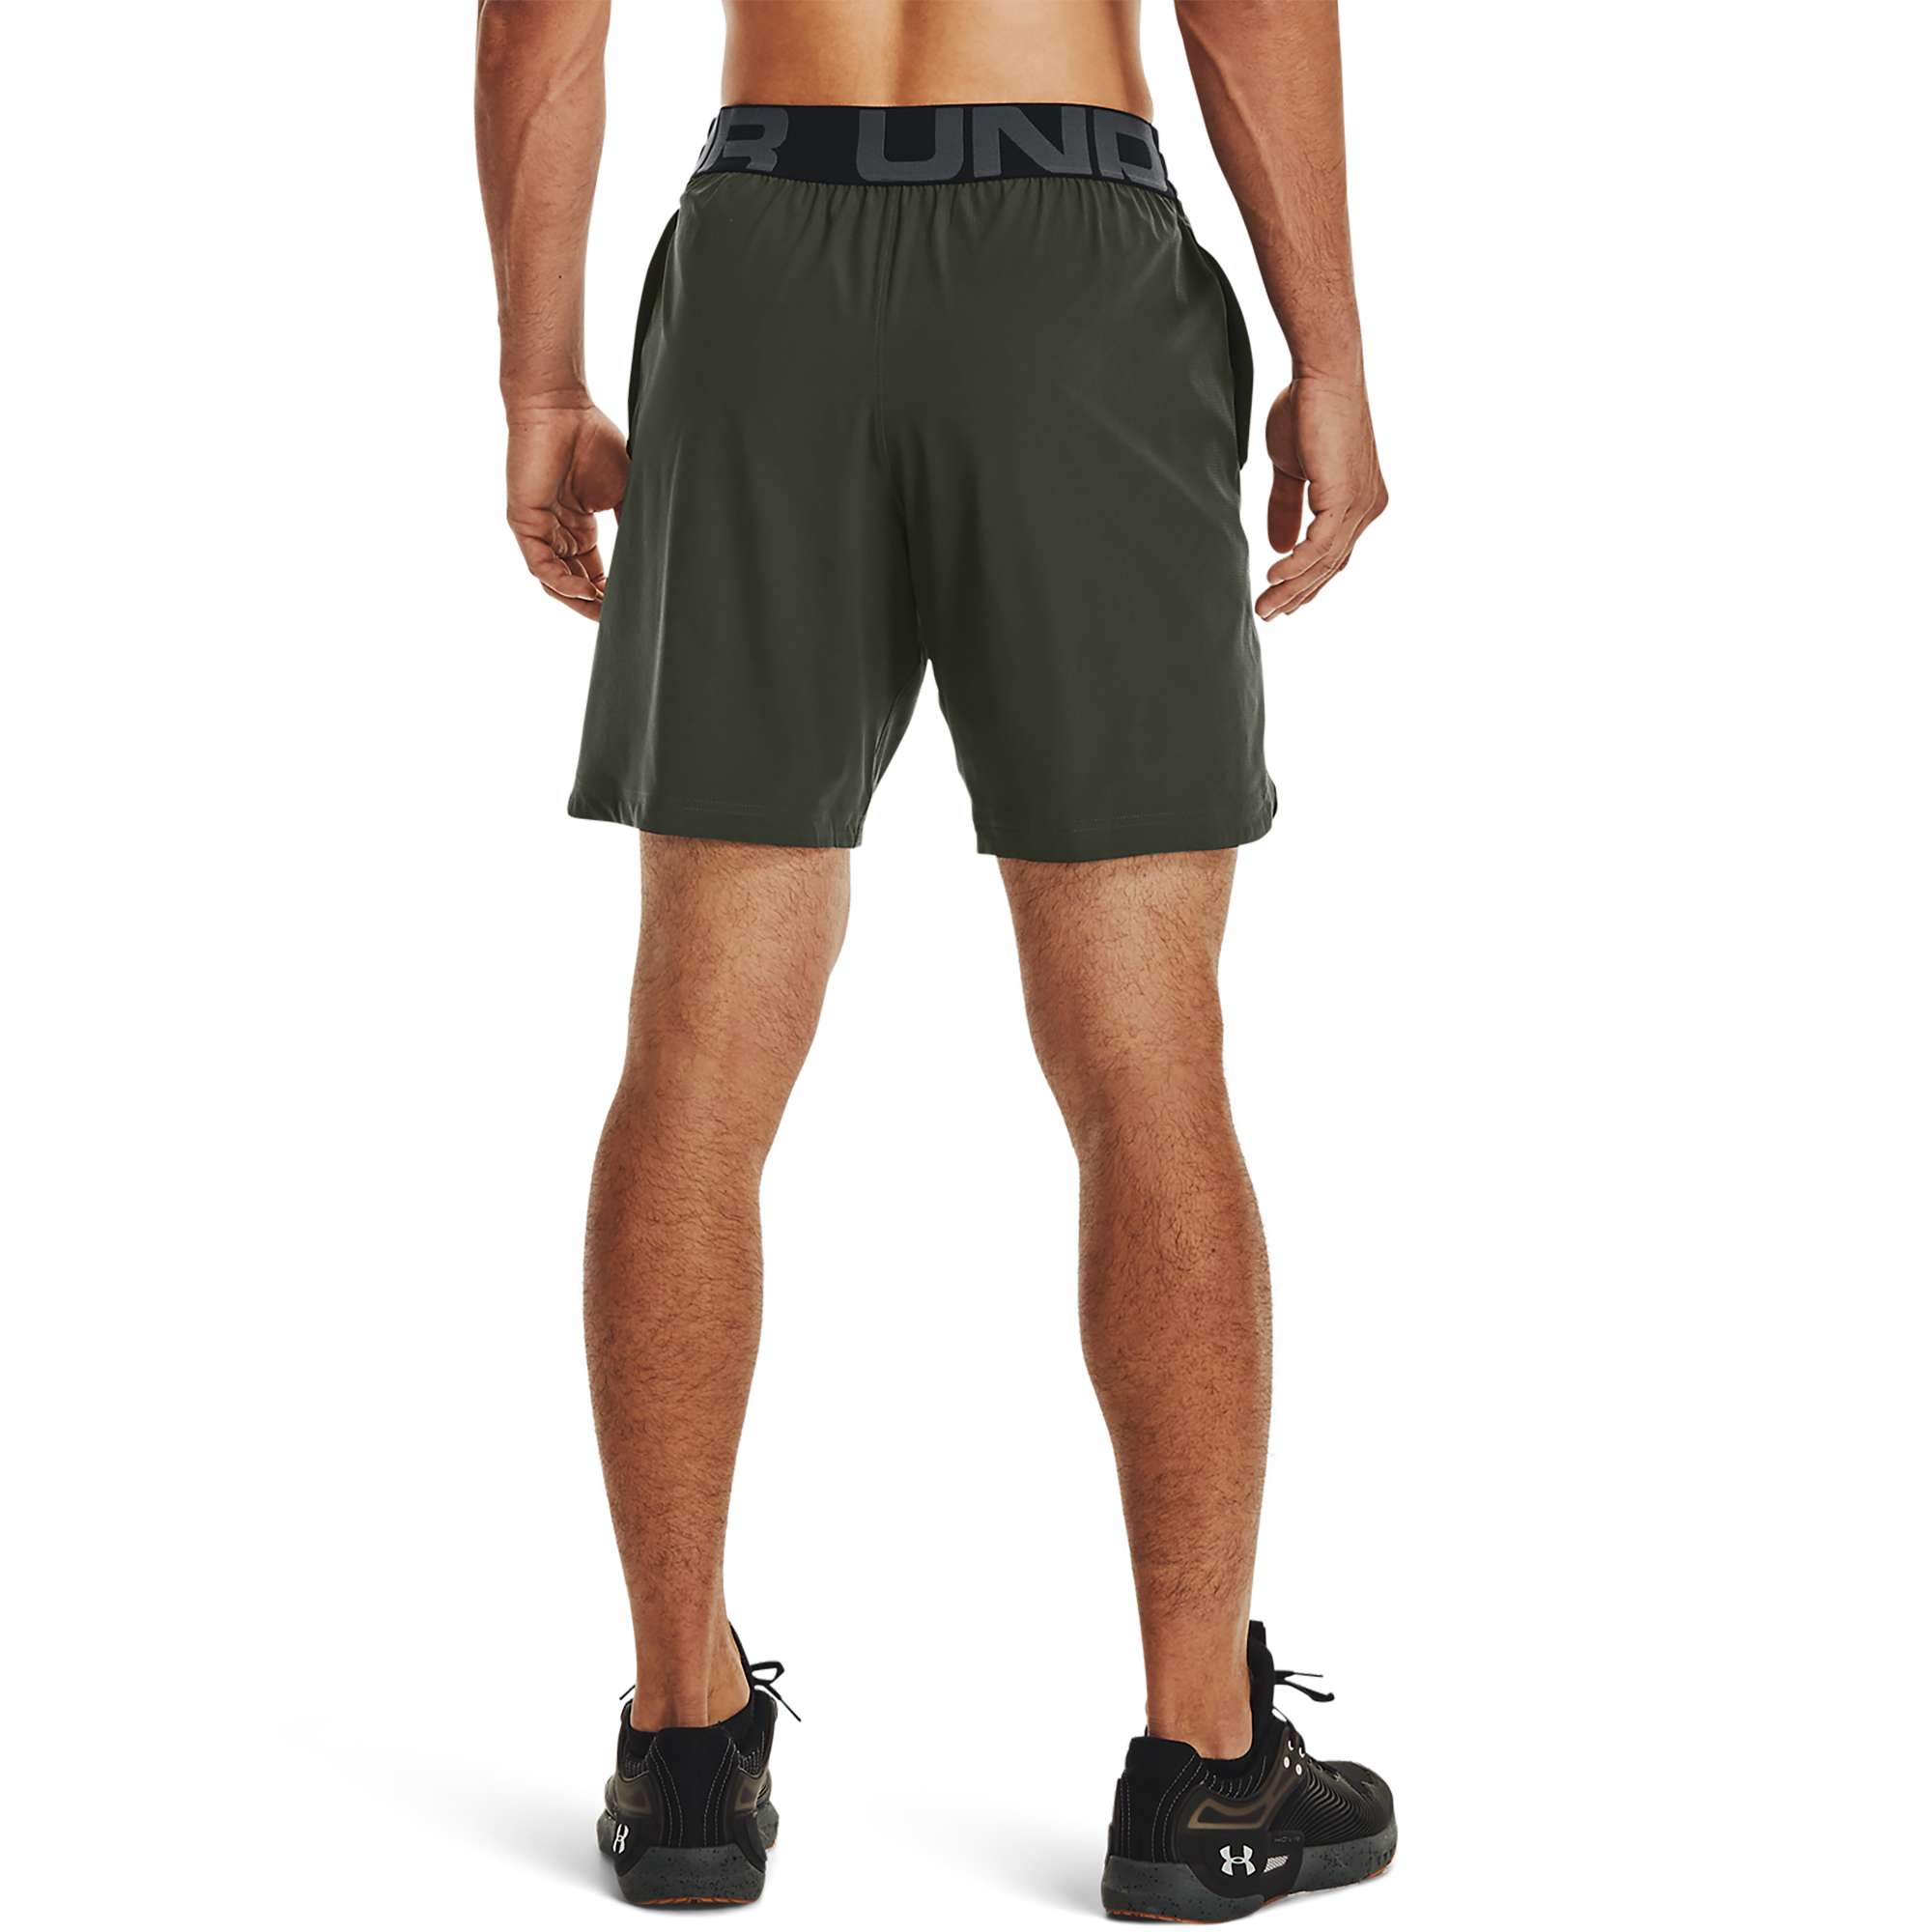 Under Armour Elevated Woven 2.0 Shorts